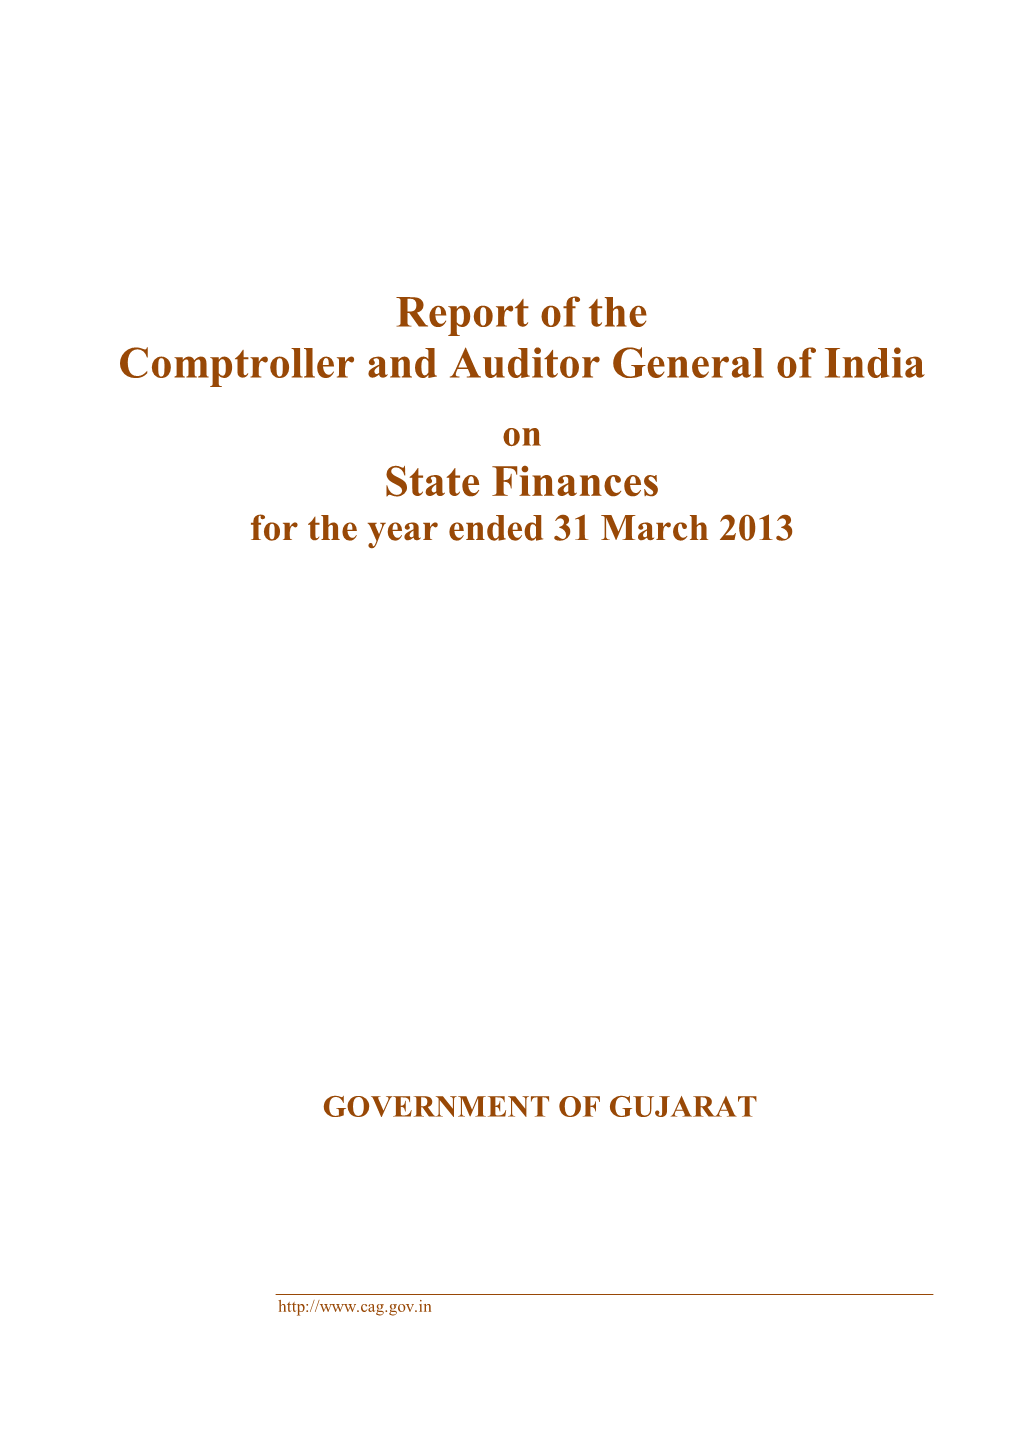 Report of the Comptroller and Auditor General of India State Finances